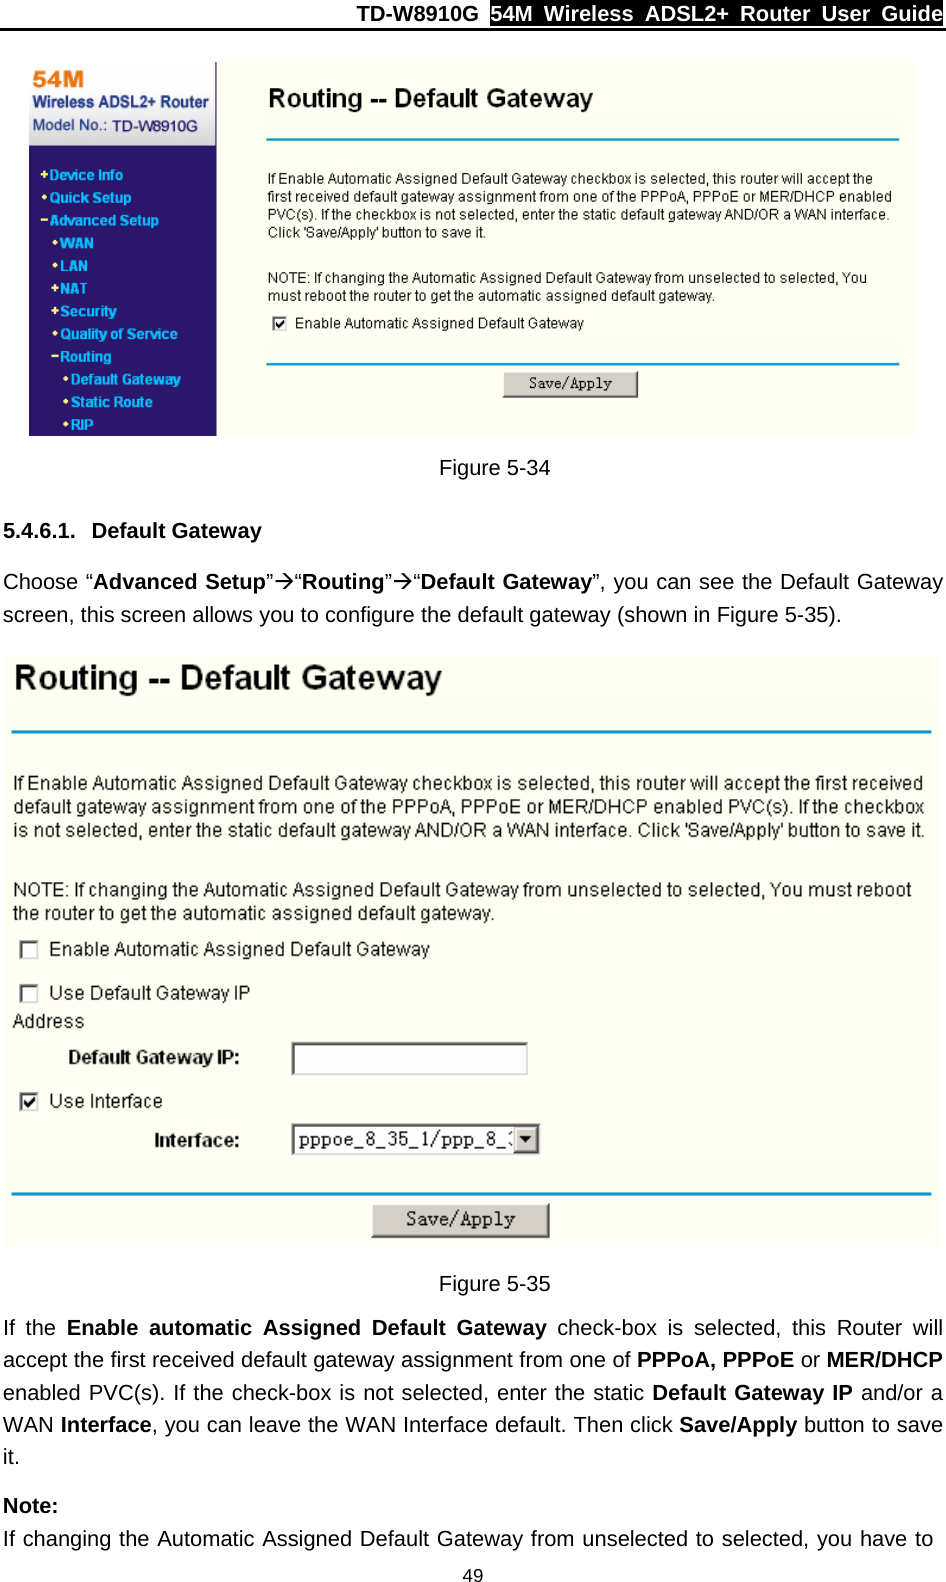 TD-W8910G  54M Wireless ADSL2+ Router User Guide  49 Figure 5-34 5.4.6.1. Default Gateway Choose “Advanced Setup”Æ“Routing”Æ“Default Gateway”, you can see the Default Gateway screen, this screen allows you to configure the default gateway (shown in Figure 5-35).  Figure 5-35 If the Enable automatic Assigned Default Gateway check-box is selected, this Router will accept the first received default gateway assignment from one of PPPoA, PPPoE or MER/DHCP enabled PVC(s). If the check-box is not selected, enter the static Default Gateway IP and/or a WAN Interface, you can leave the WAN Interface default. Then click Save/Apply button to save it. Note: If changing the Automatic Assigned Default Gateway from unselected to selected, you have to 